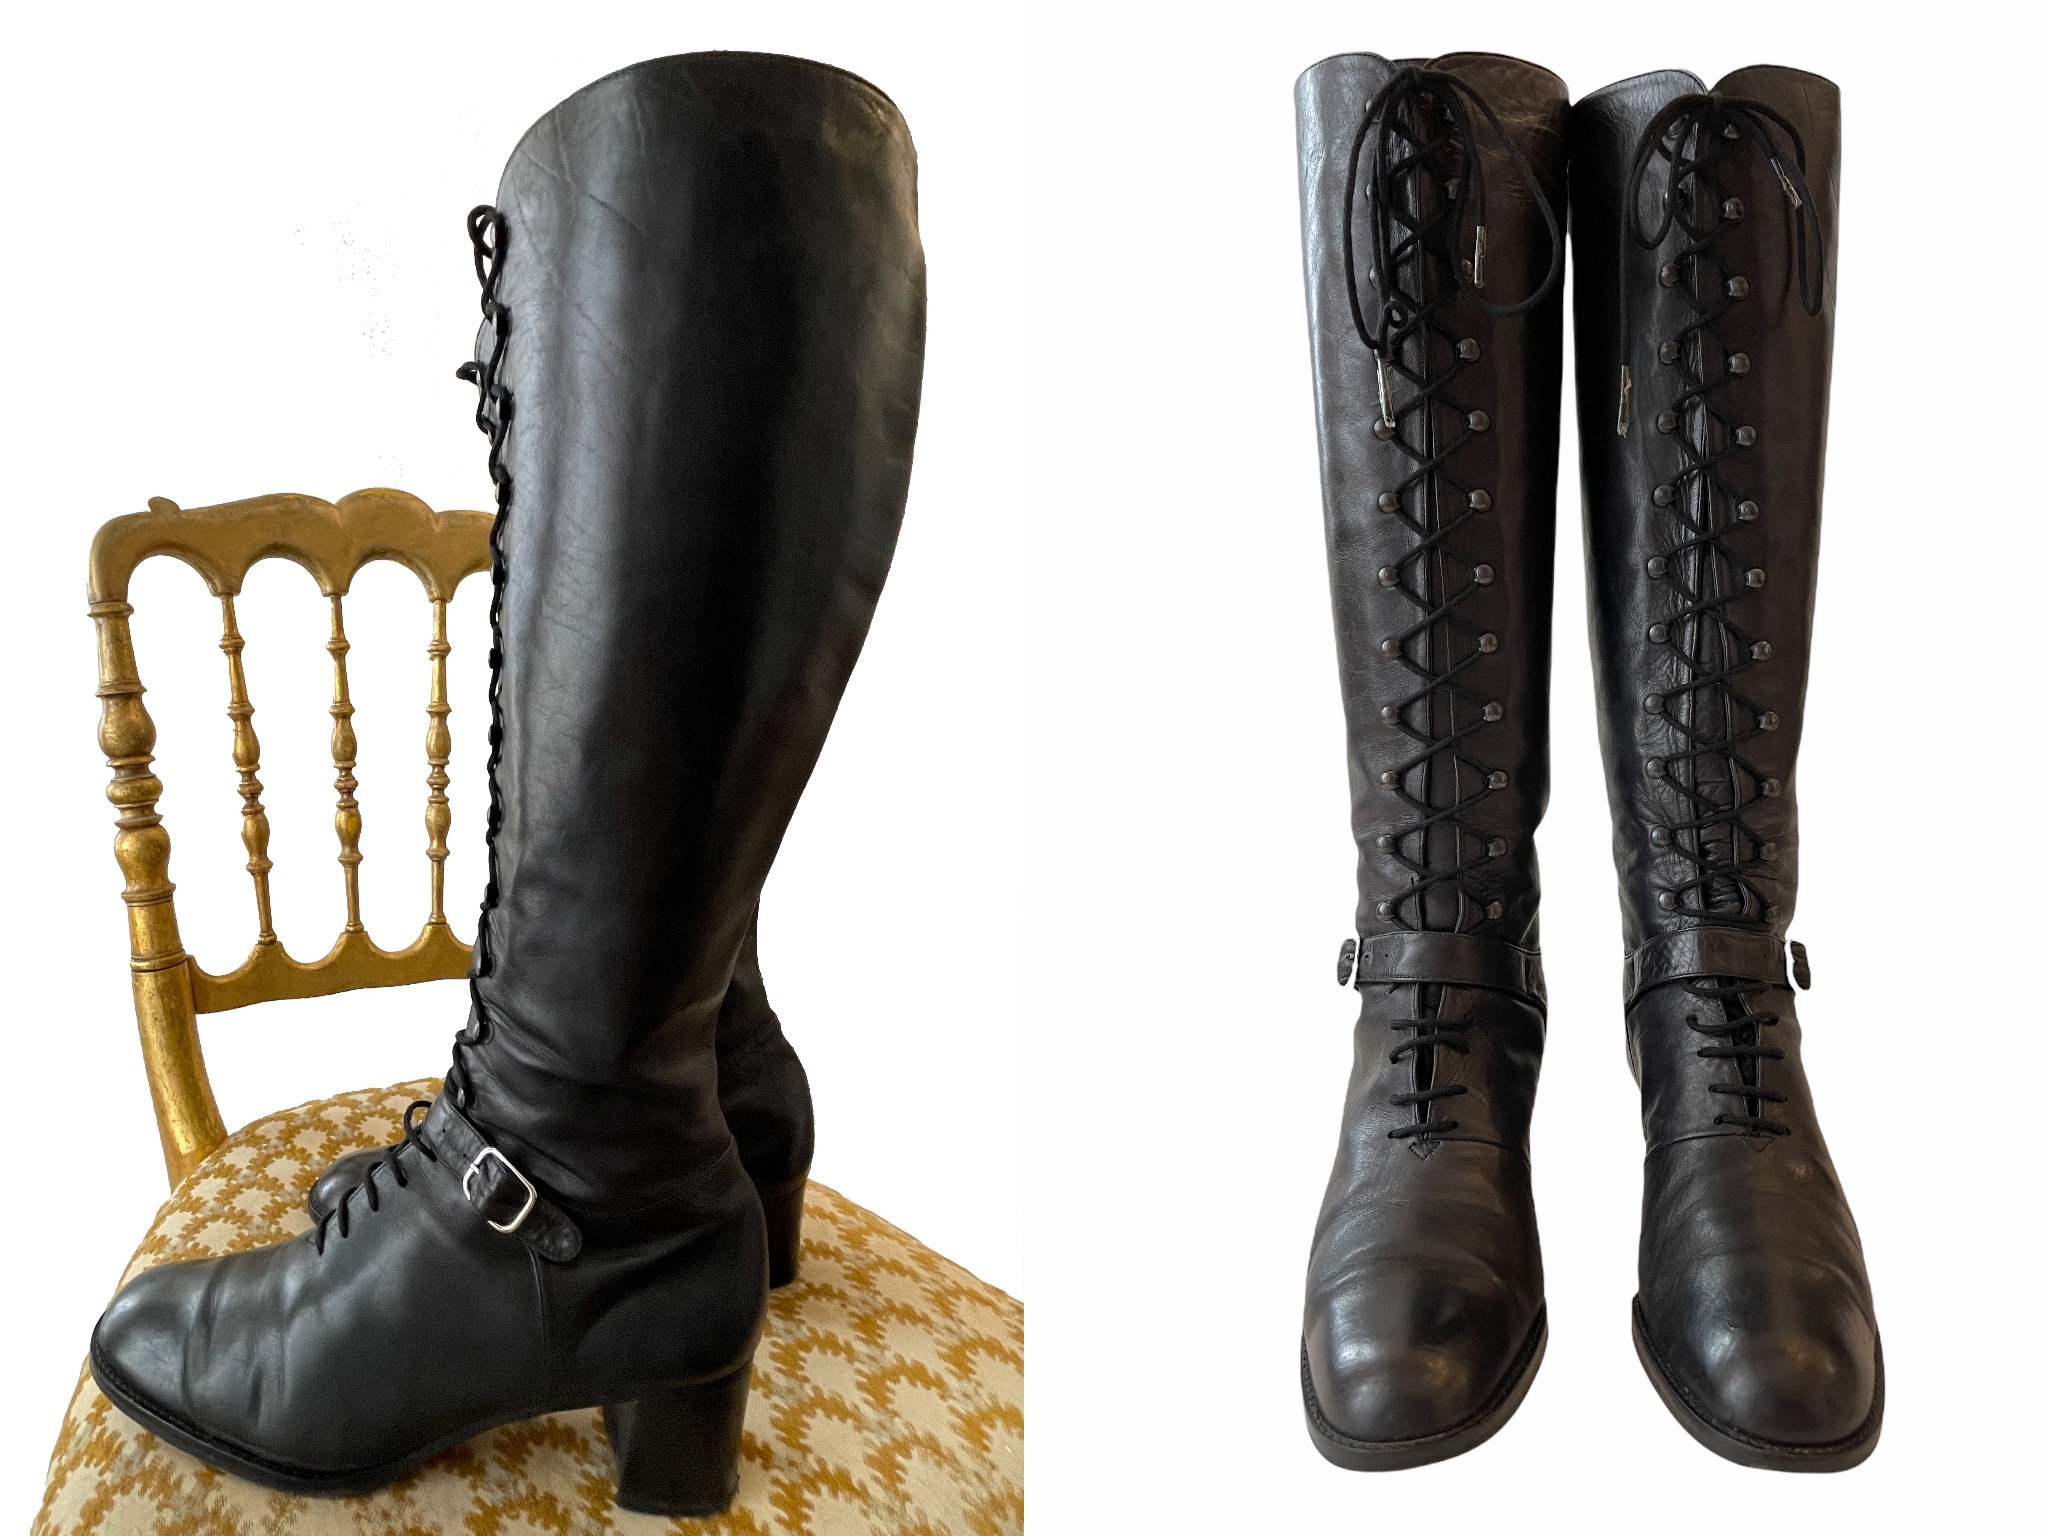 Chaussures Chaussures femme Bottes Bottes déquitation Sz 7.5 vintage Tall Brown Genuine Leather Nine West Lace Up Flat Riding Boots. 